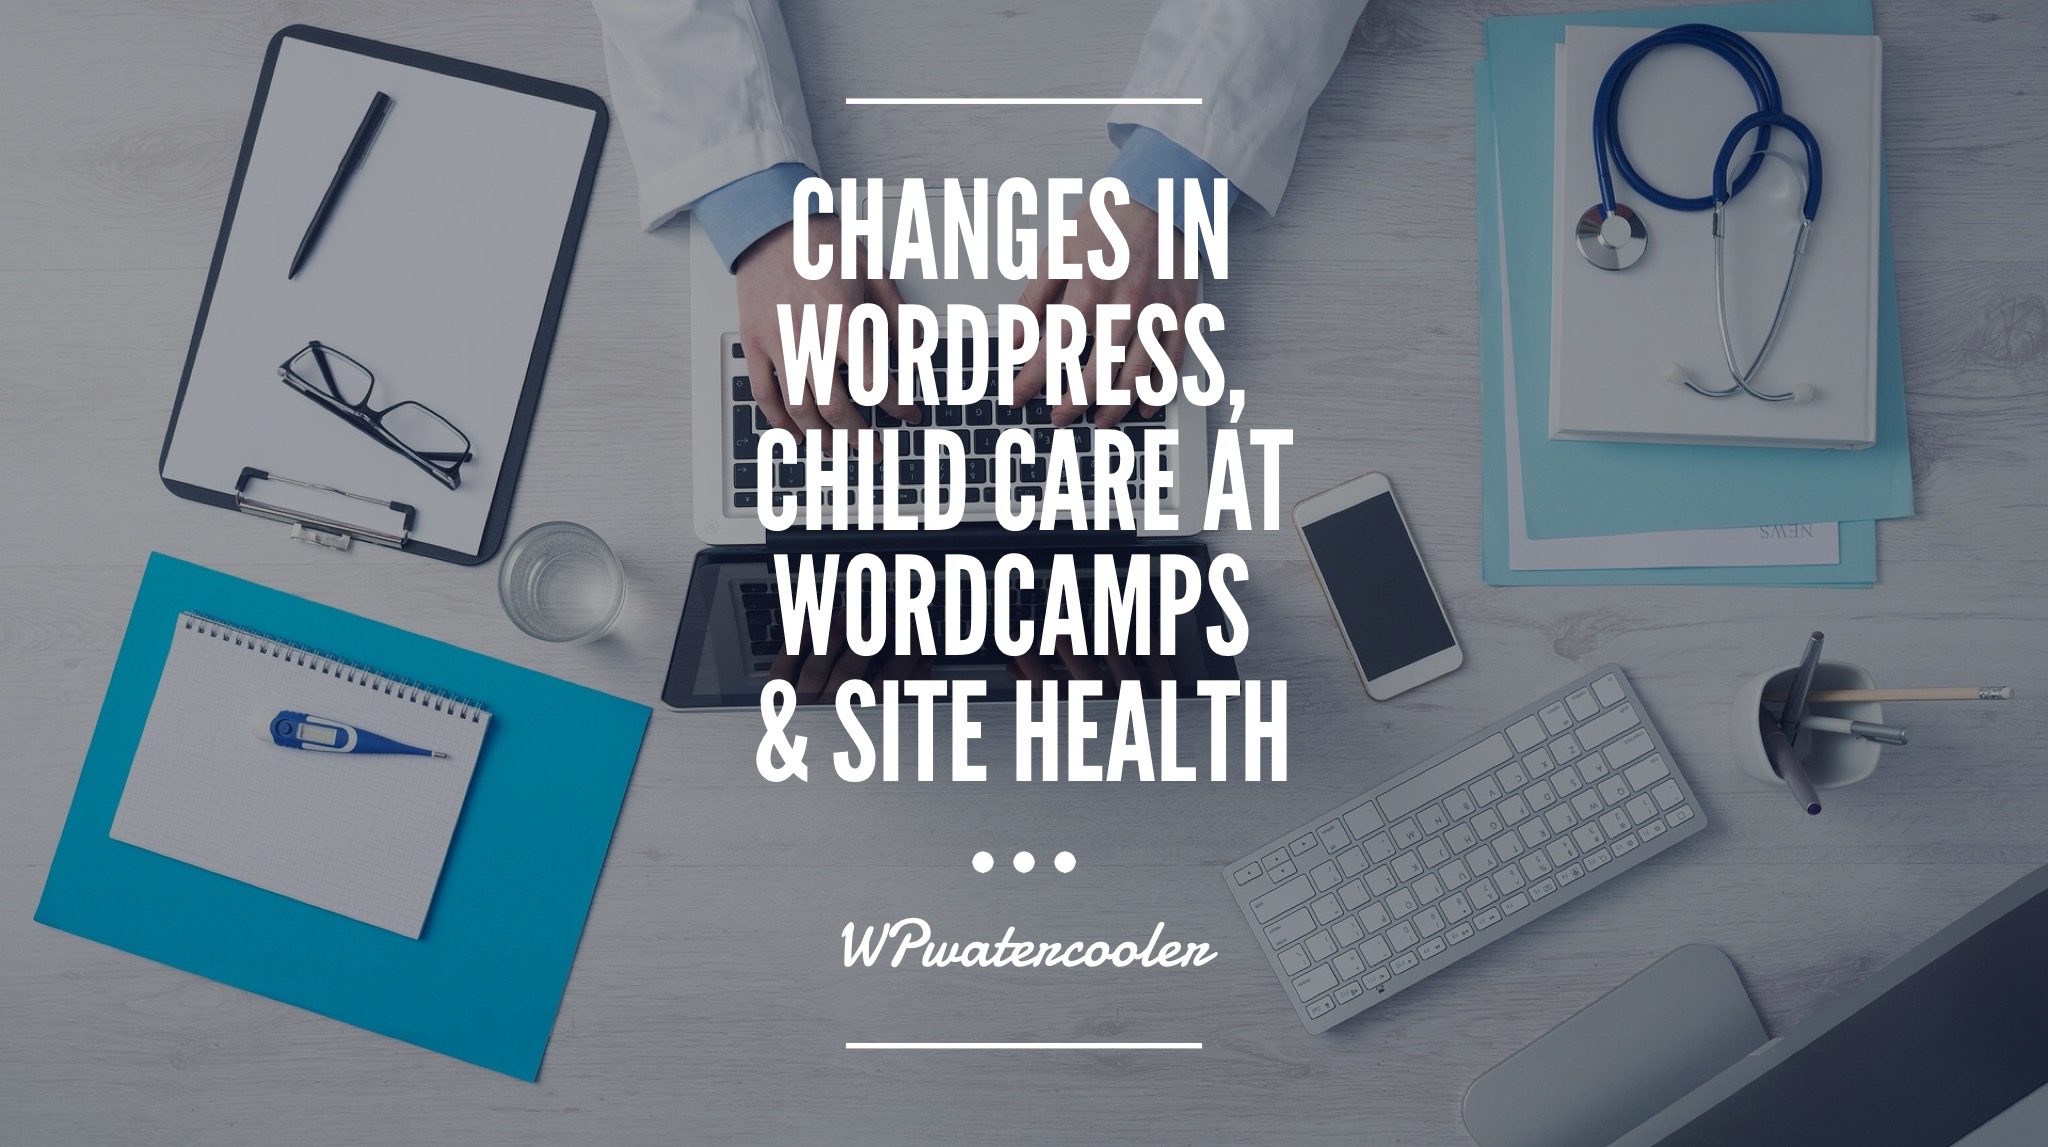 EP310 – Changes in WordPress, child care at WordCamps & site health